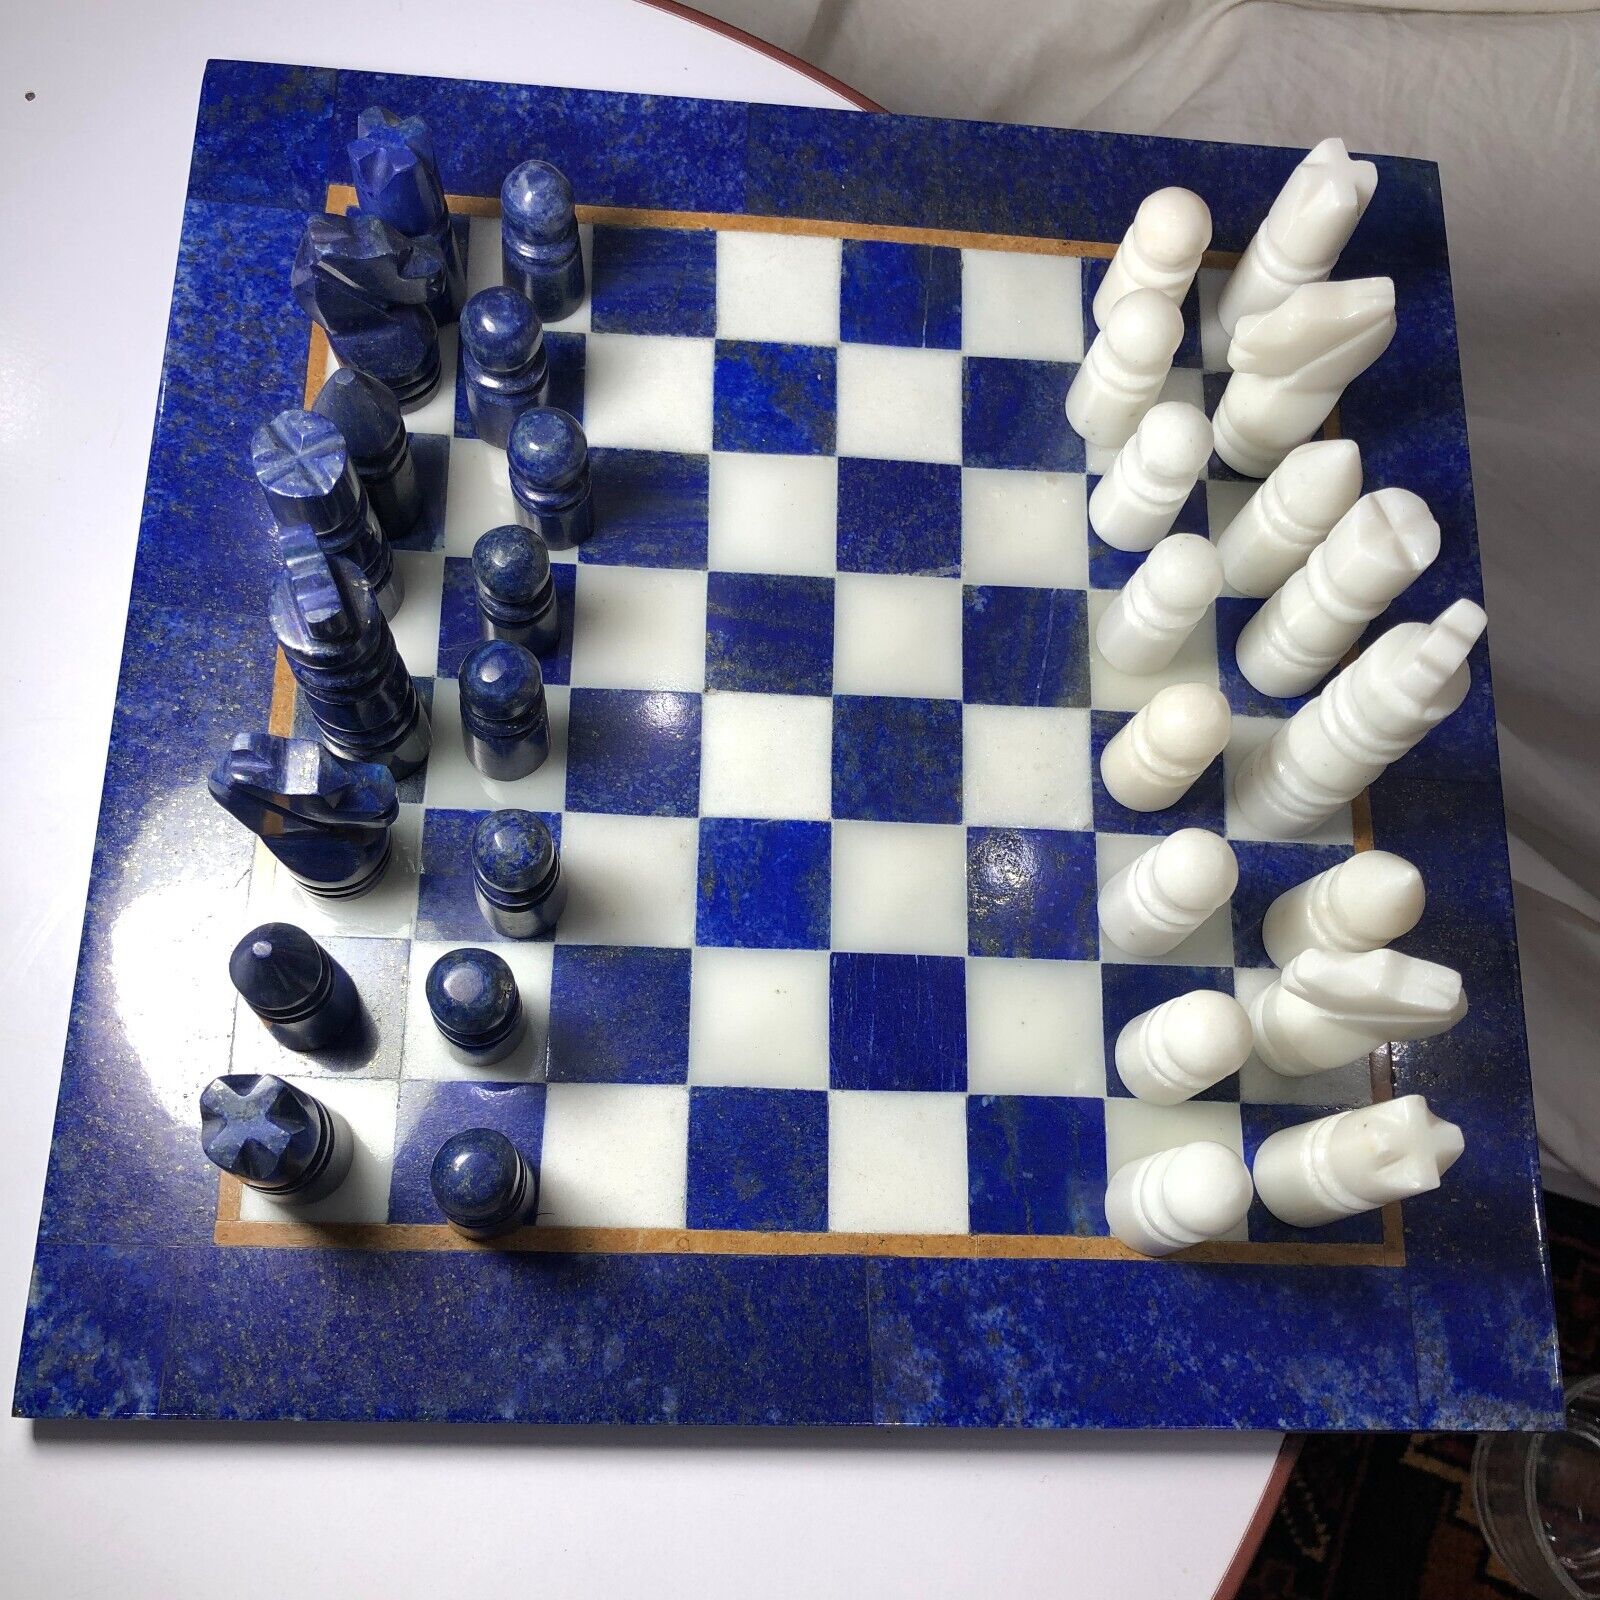 Lapis Lazuli Stone Chess Set  Complete Board And Pieces- Luxury Game Handmade